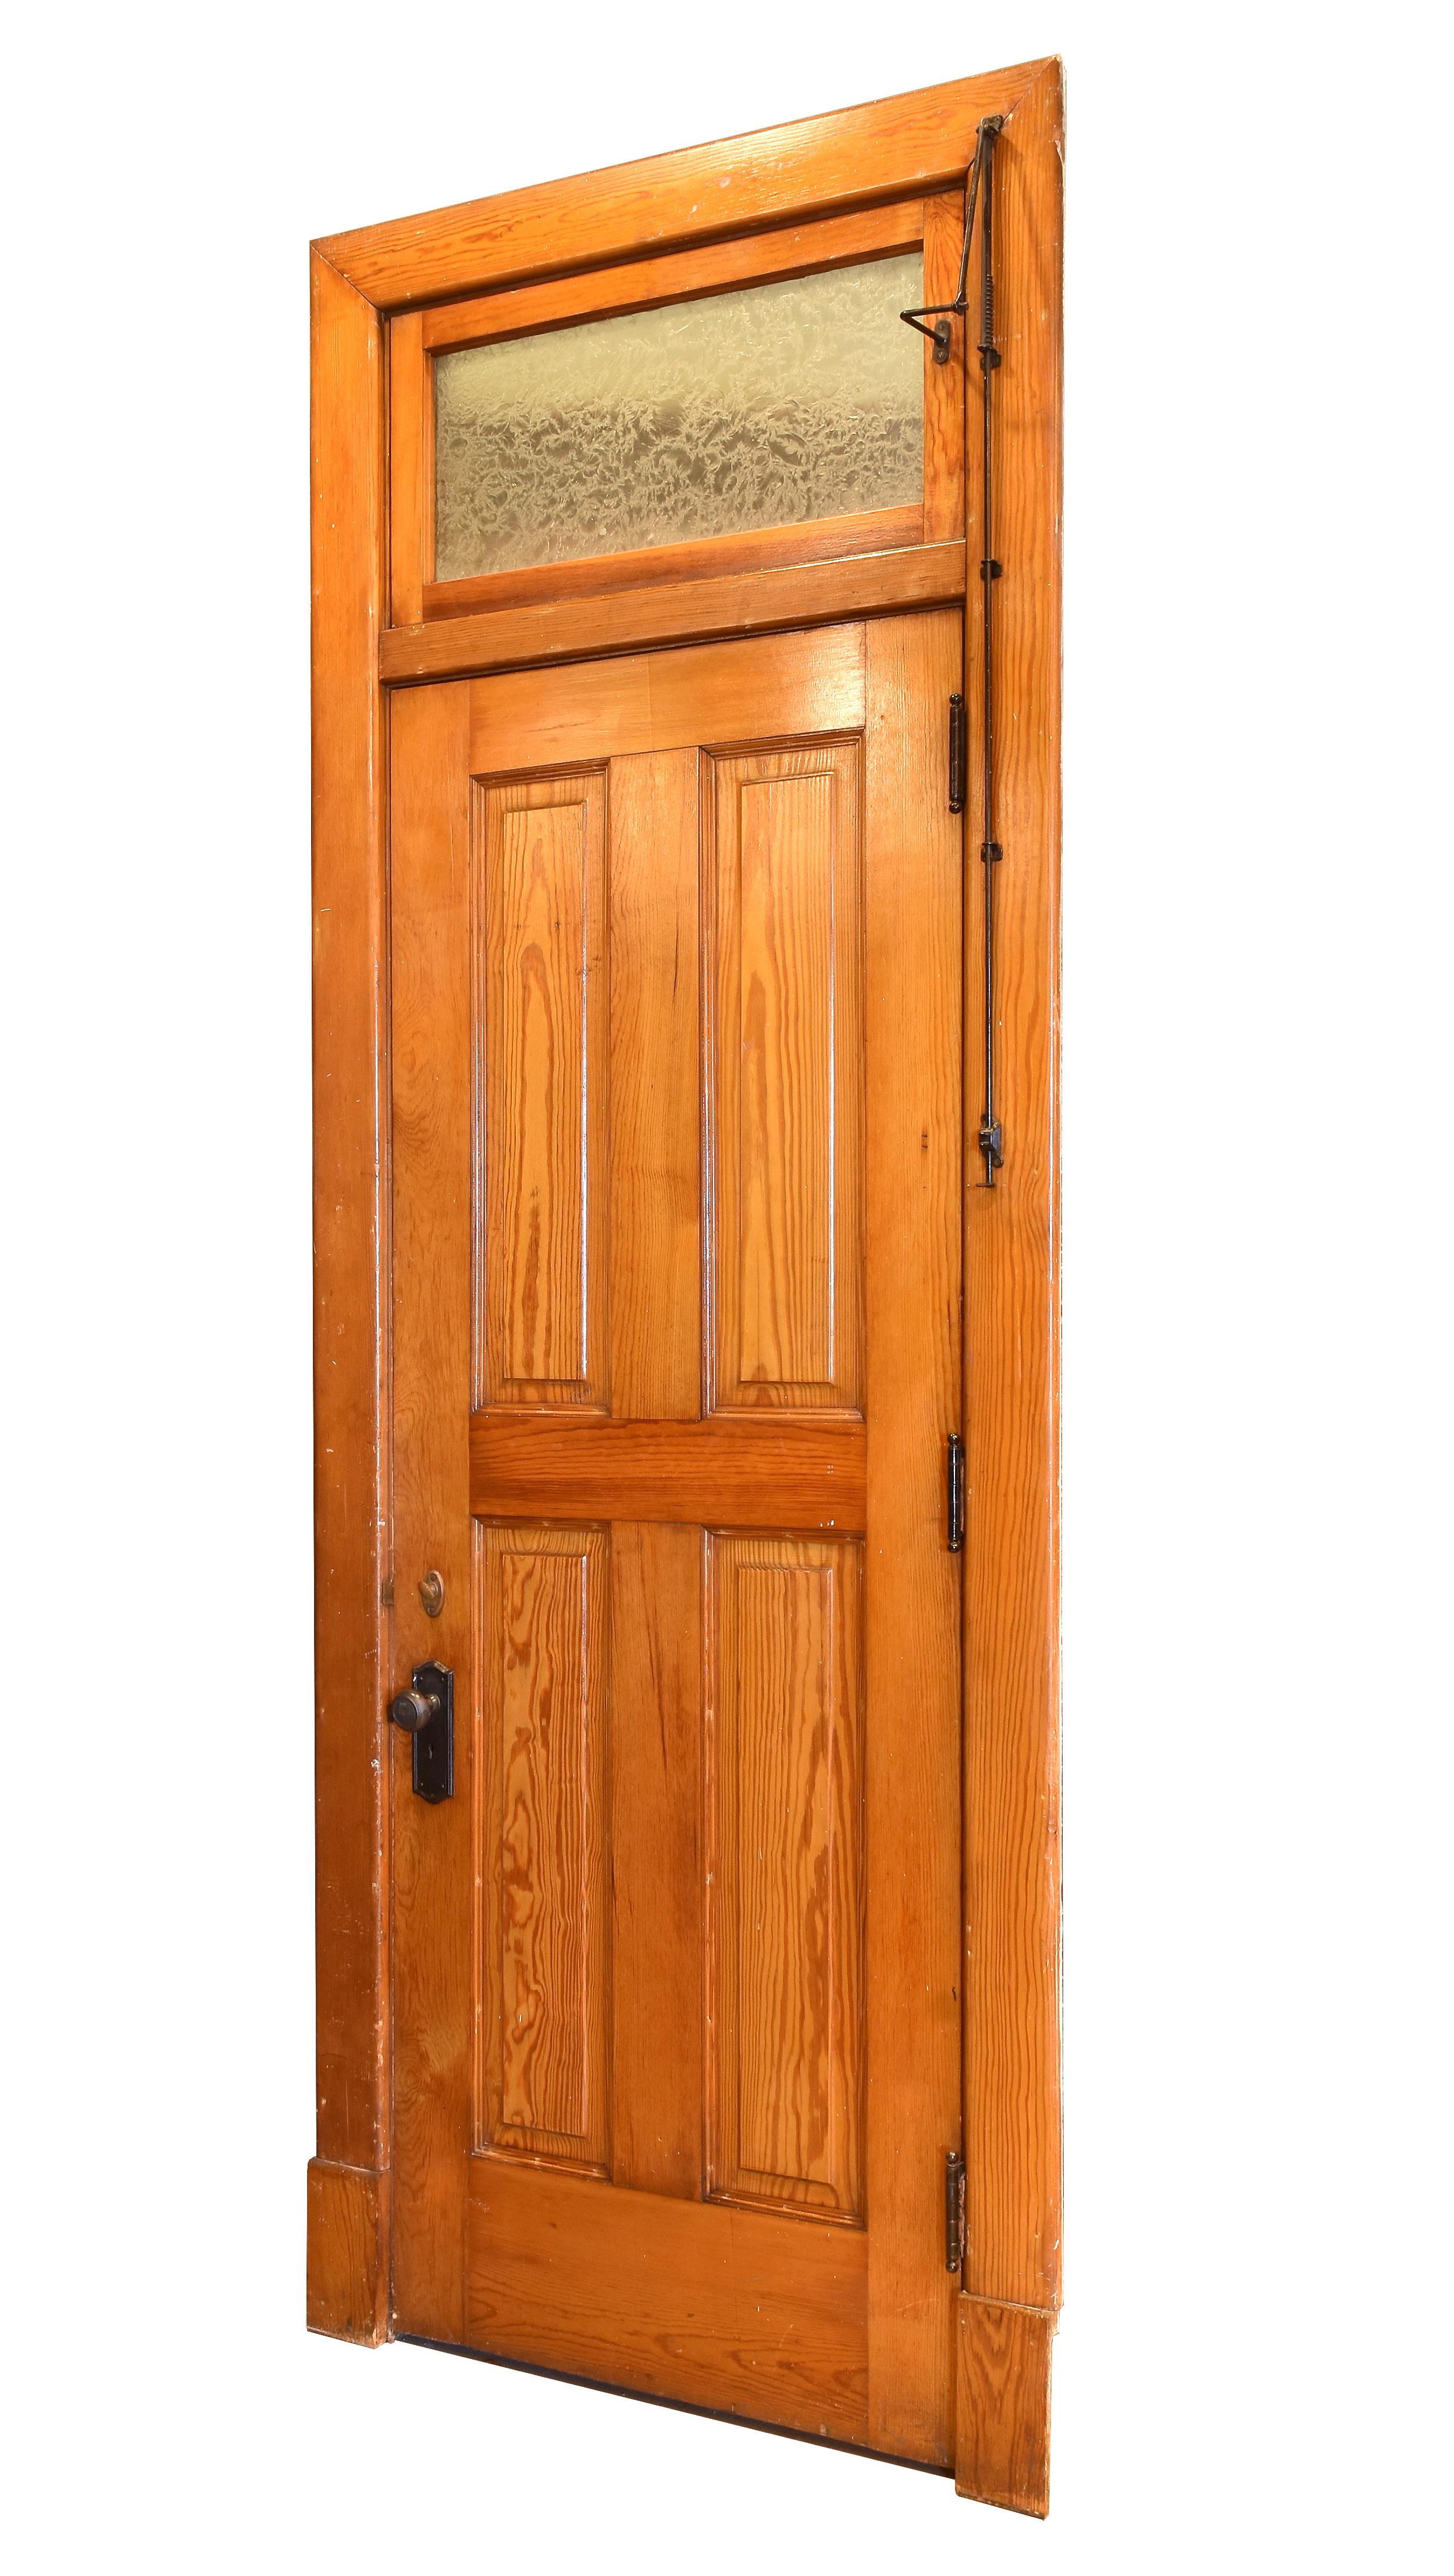 These old growth Douglas Fir Transom door units are uniquely pristine with 4-panel doors, original glue-chip glass and working transom windows. These rare door units would bring great historical character to any room! The original finish, complete